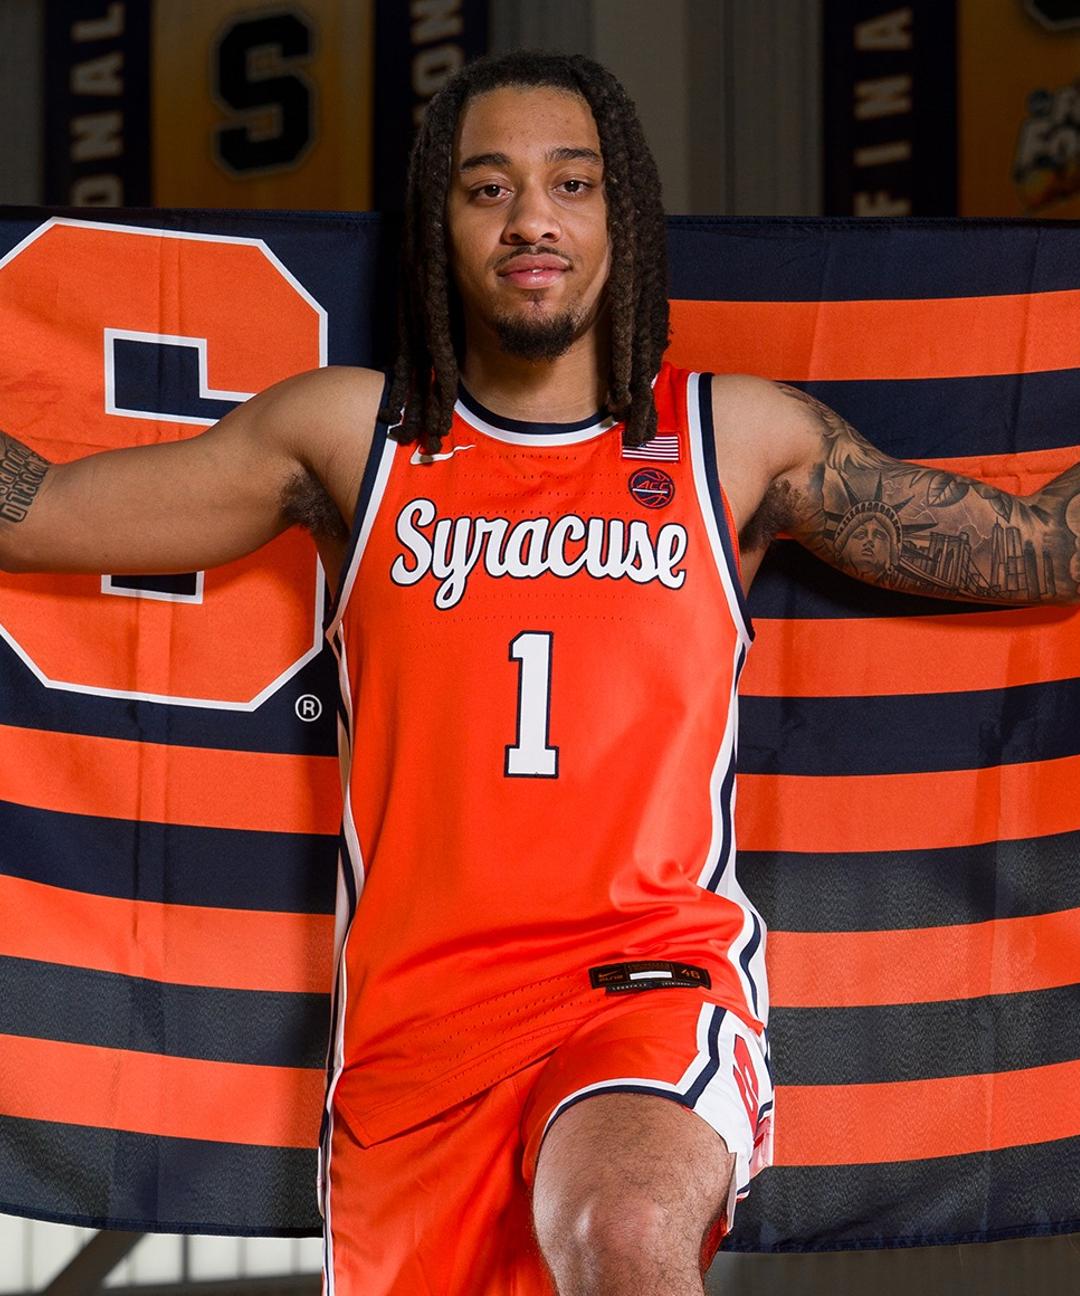 Image related to Carlos Joins Syracuse Hoop Roster